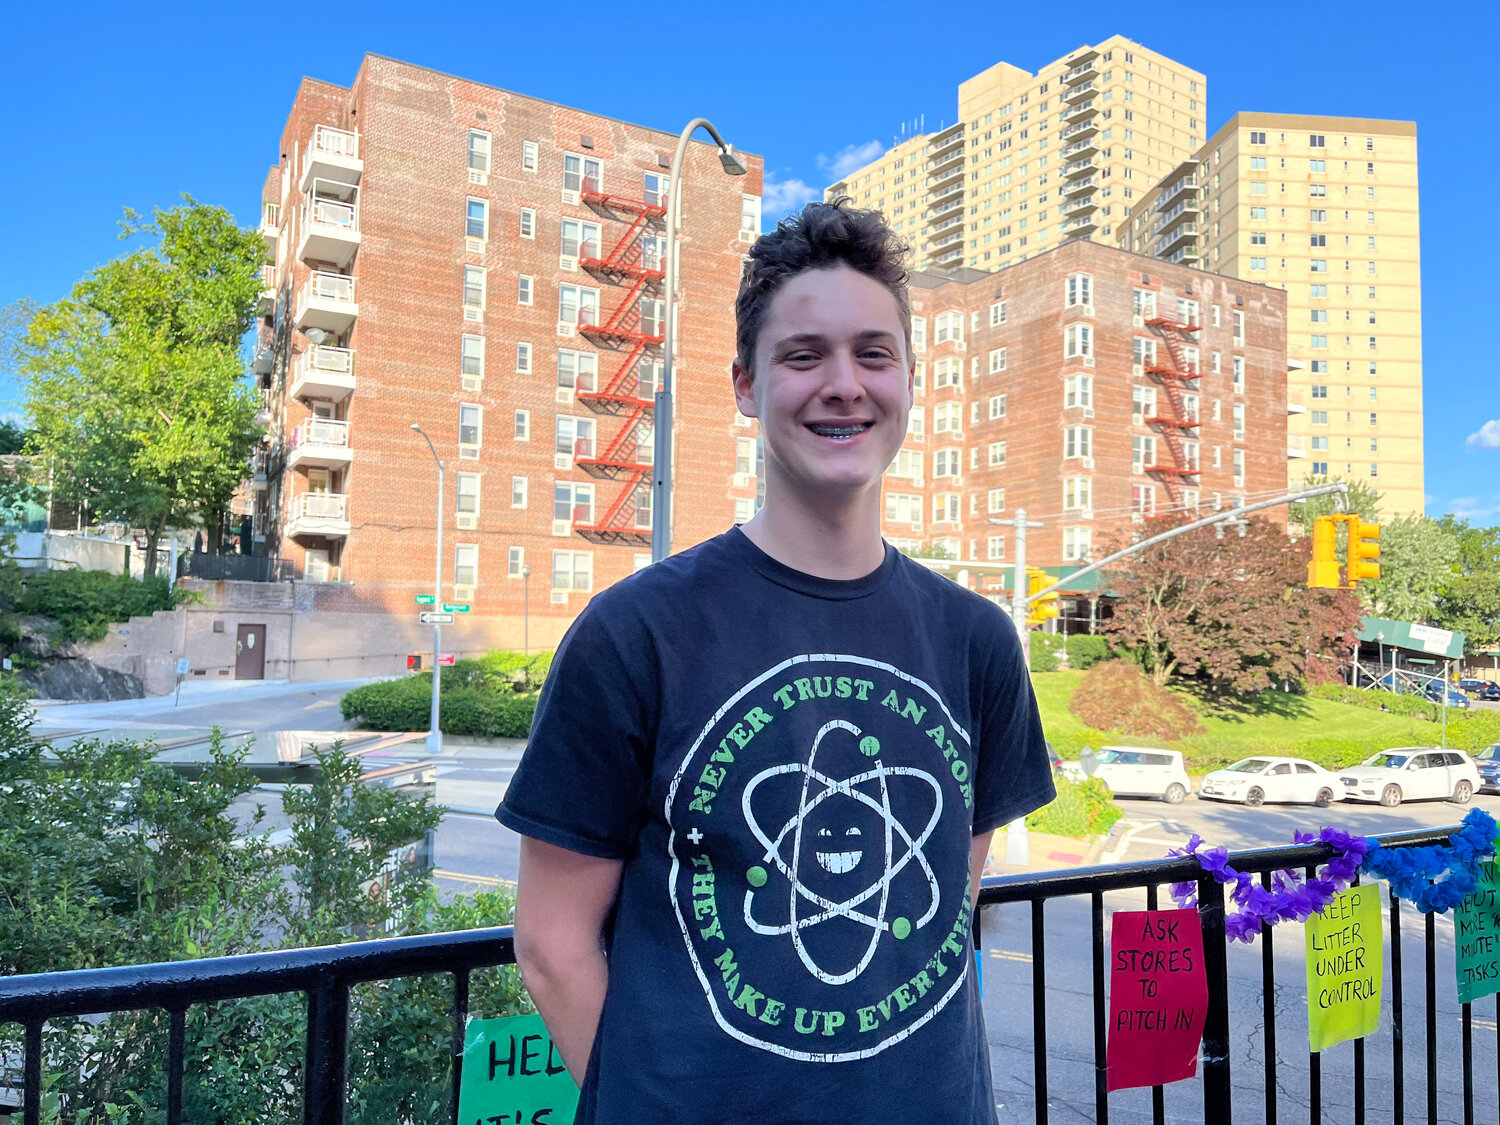 Zach Brem, a 16-year-old volunteer with the Spuyten Duyvil community garden, helped out with the 14th anniversary of the garden on July 30.